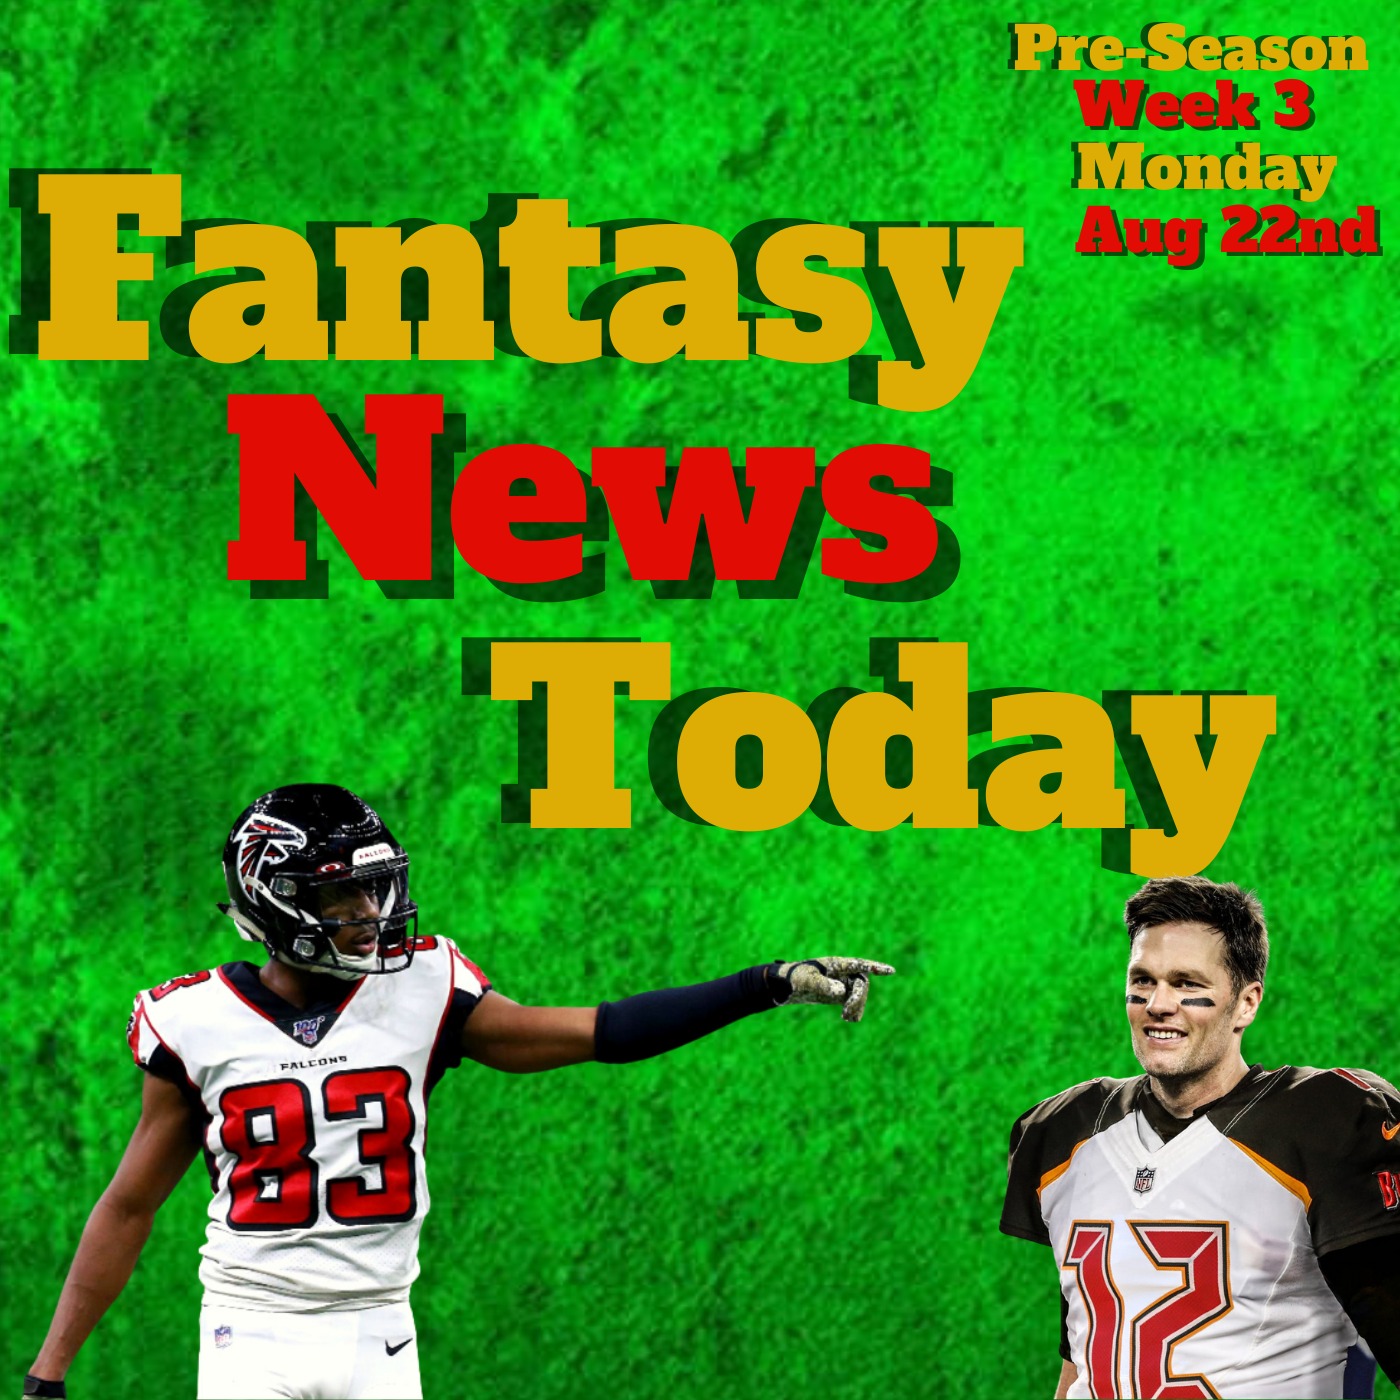 Fantasy Football News Today LIVE | Monday August 22nd 2022 Image